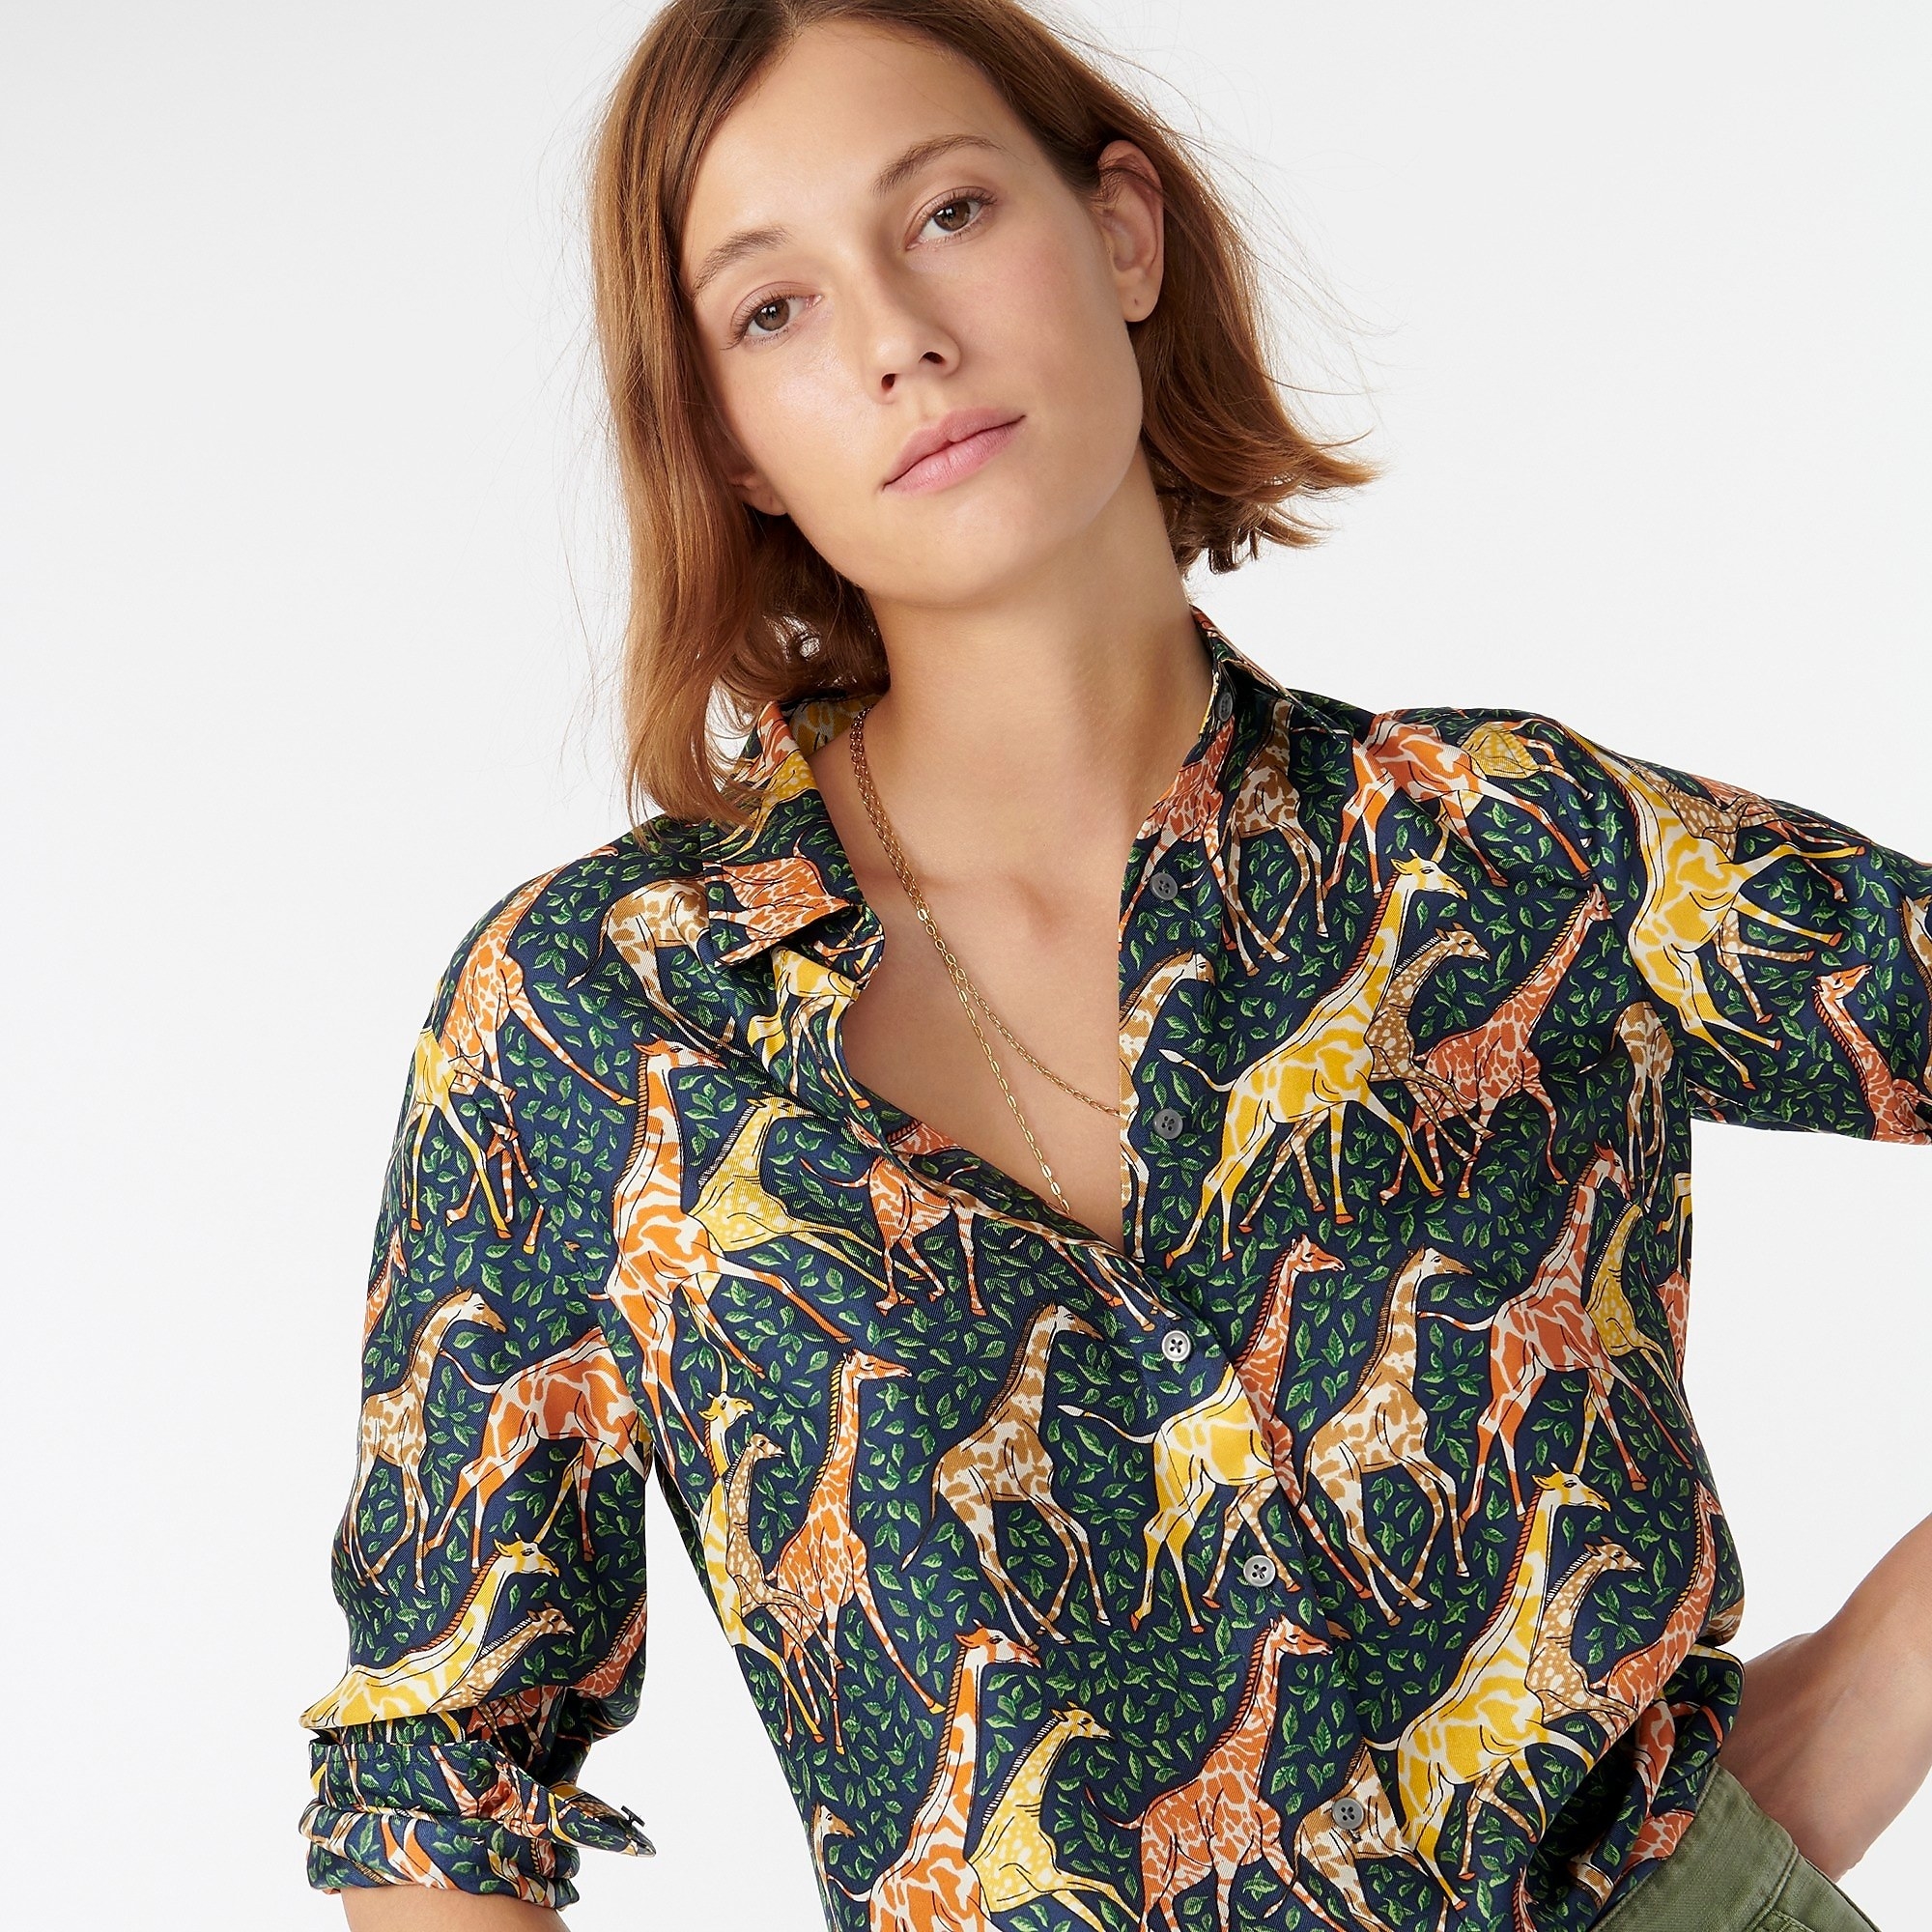 A model wearing the navy shirt printed with green leaves and a heard of yellow and orange running giraffes